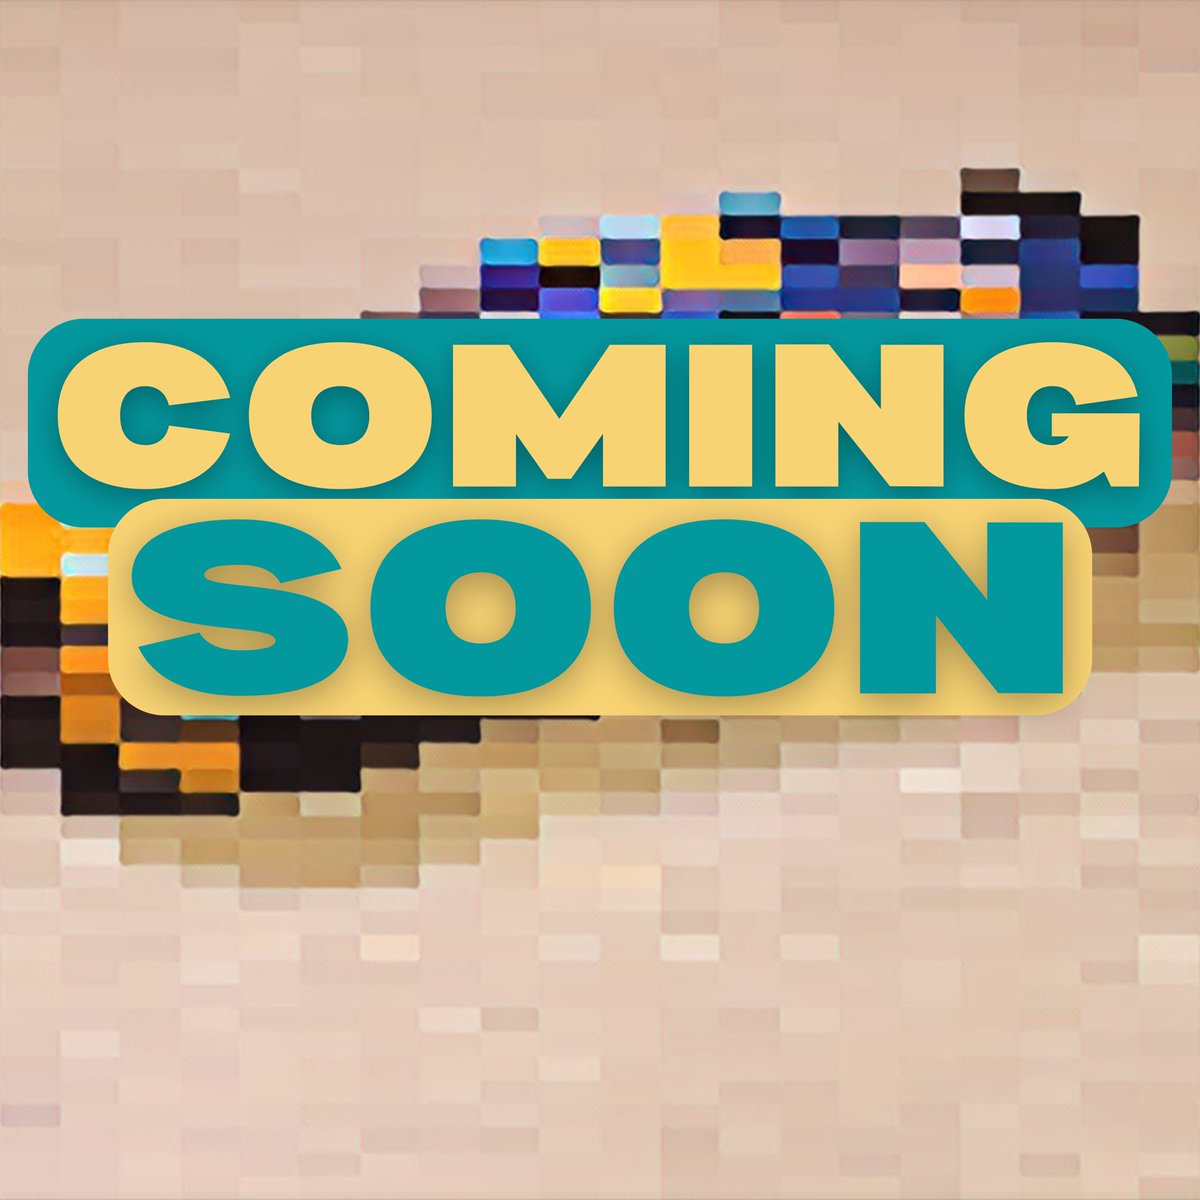 COMING SOON🚨 Something really exciting is dropping next Tuesday with our friends at @AutoOwnersIns 🤫 Any guesses?!